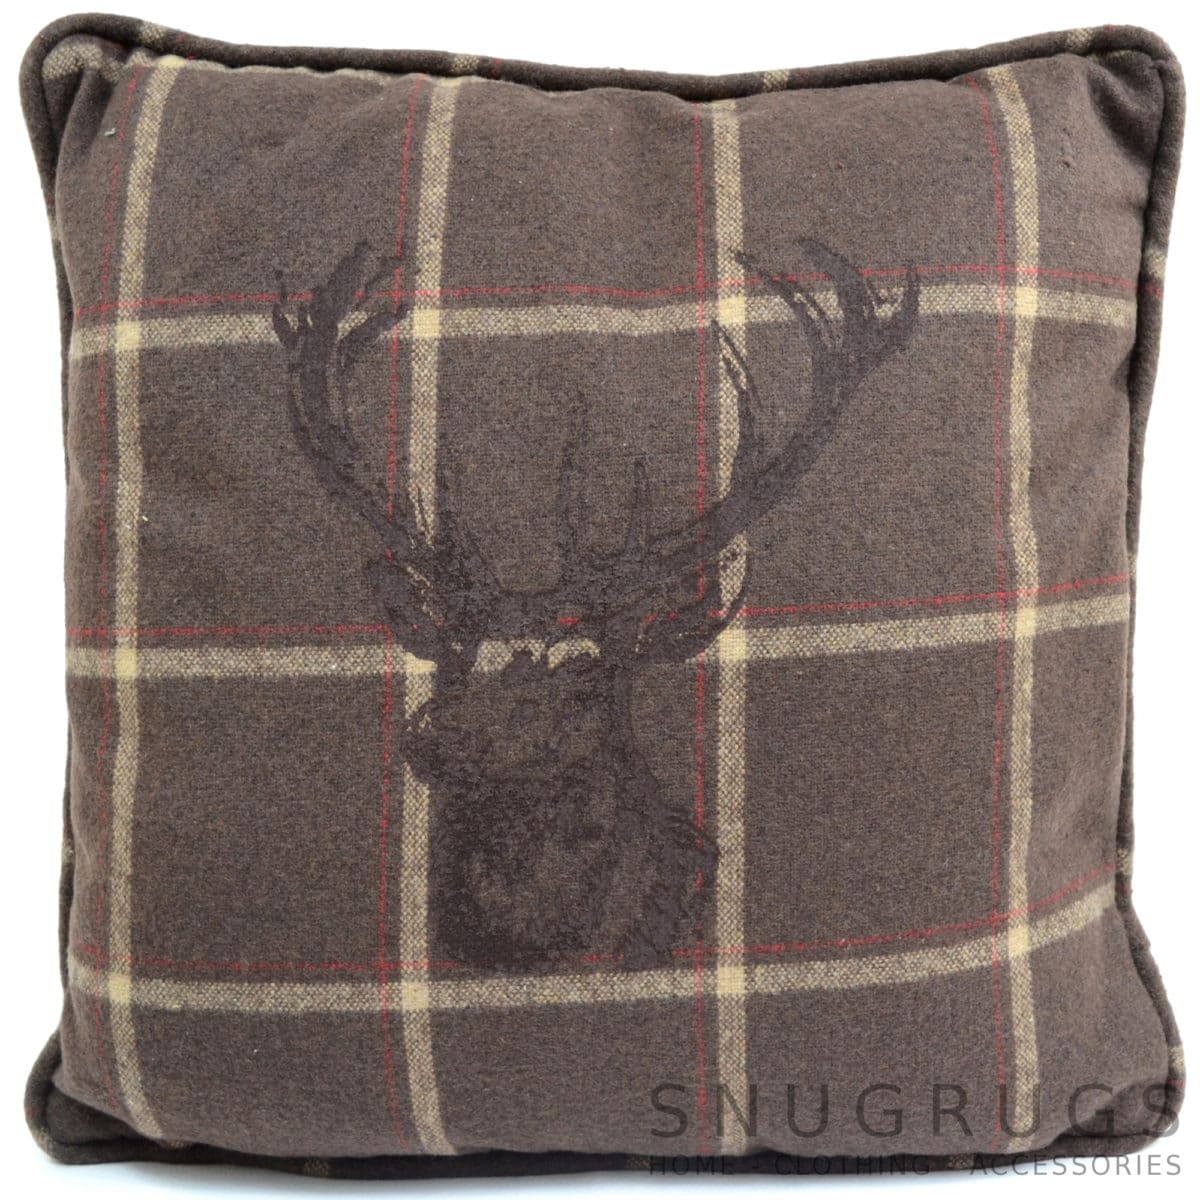 Country Style Checked Stag Head Cushion - Brown/Cream Checked